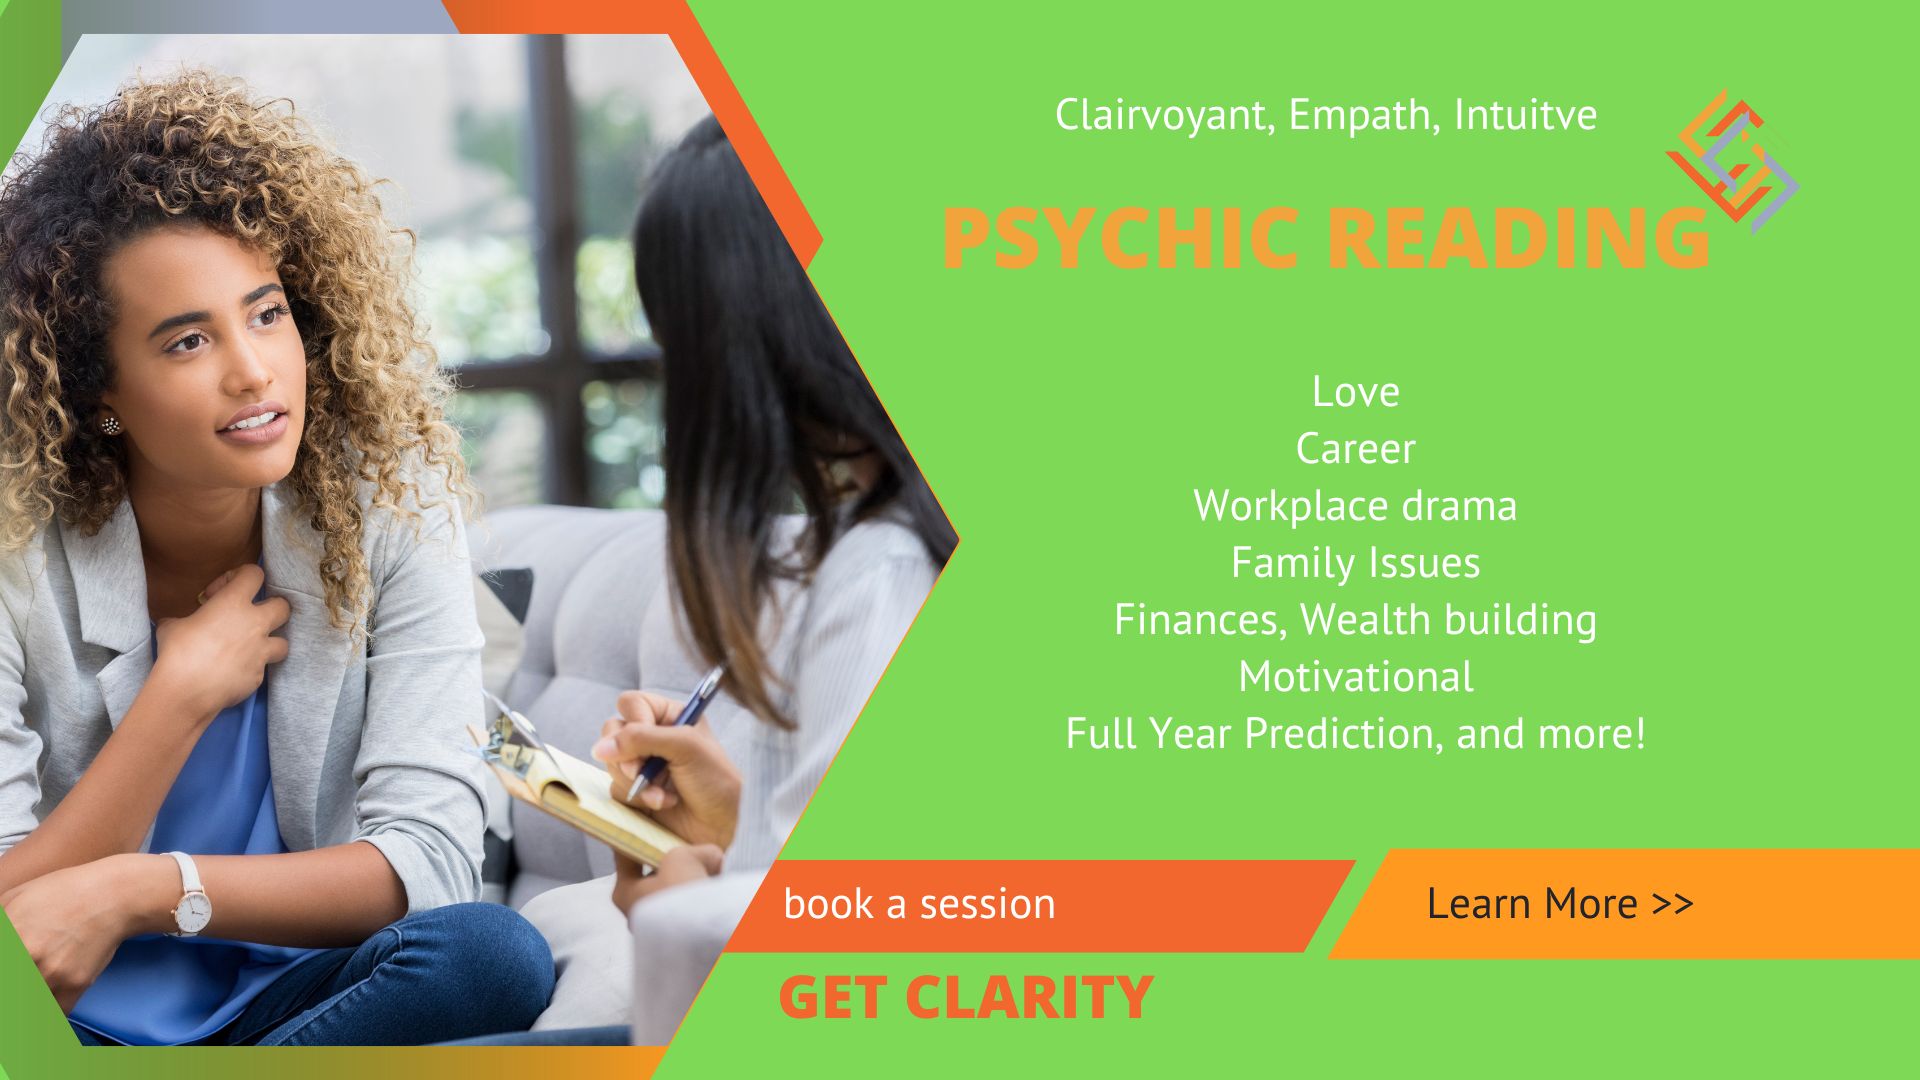 You get access the knowledge and expertise of gifted psychics, oracle readers, tarot readers as well as the senses intuitive readers, right in the comfort of your home. We are here for you! Contact us today.